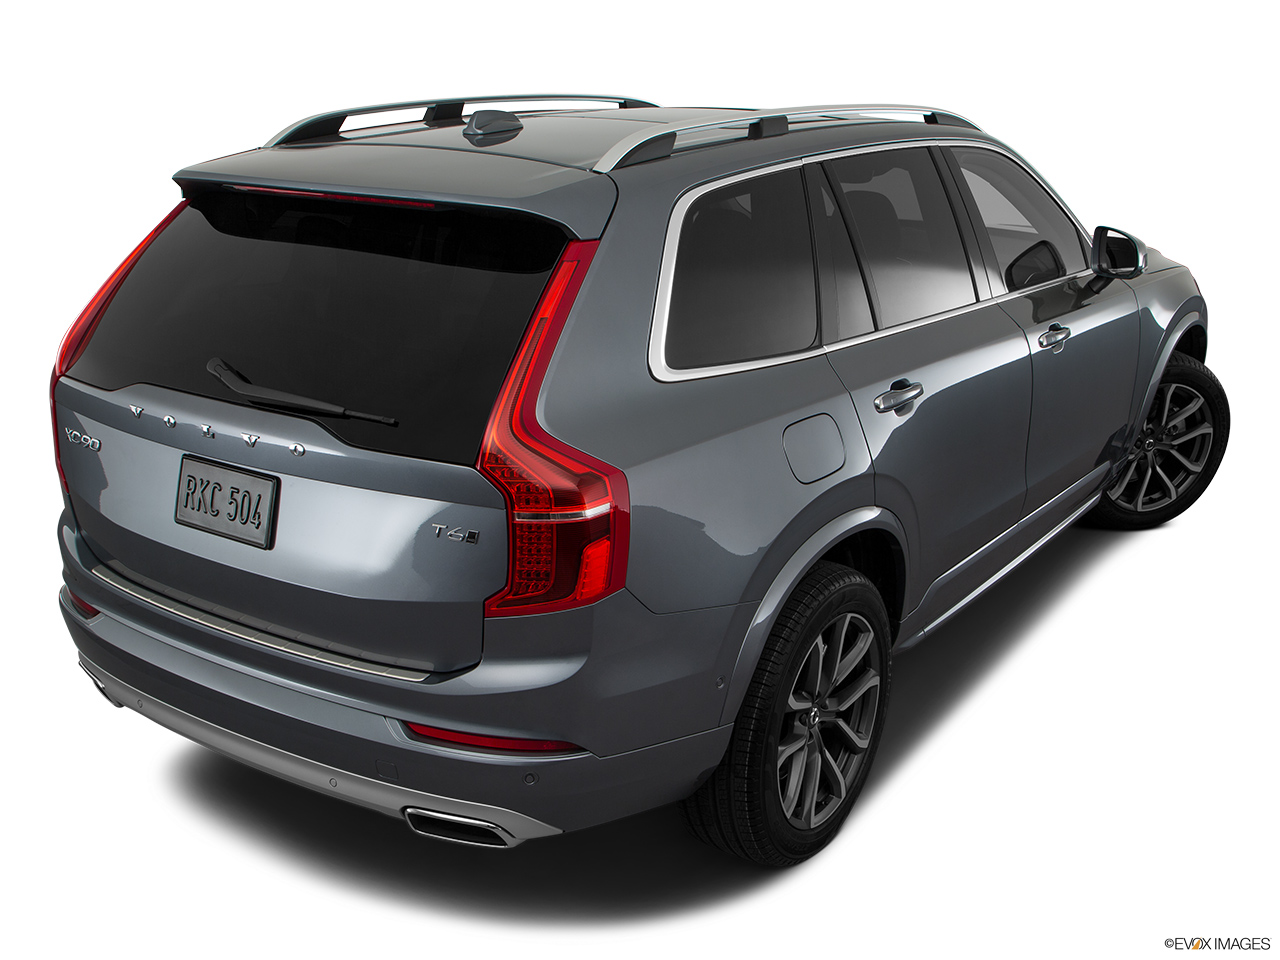 2018 Volvo XC90 T6 Momentum Rear 3/4 angle view. 